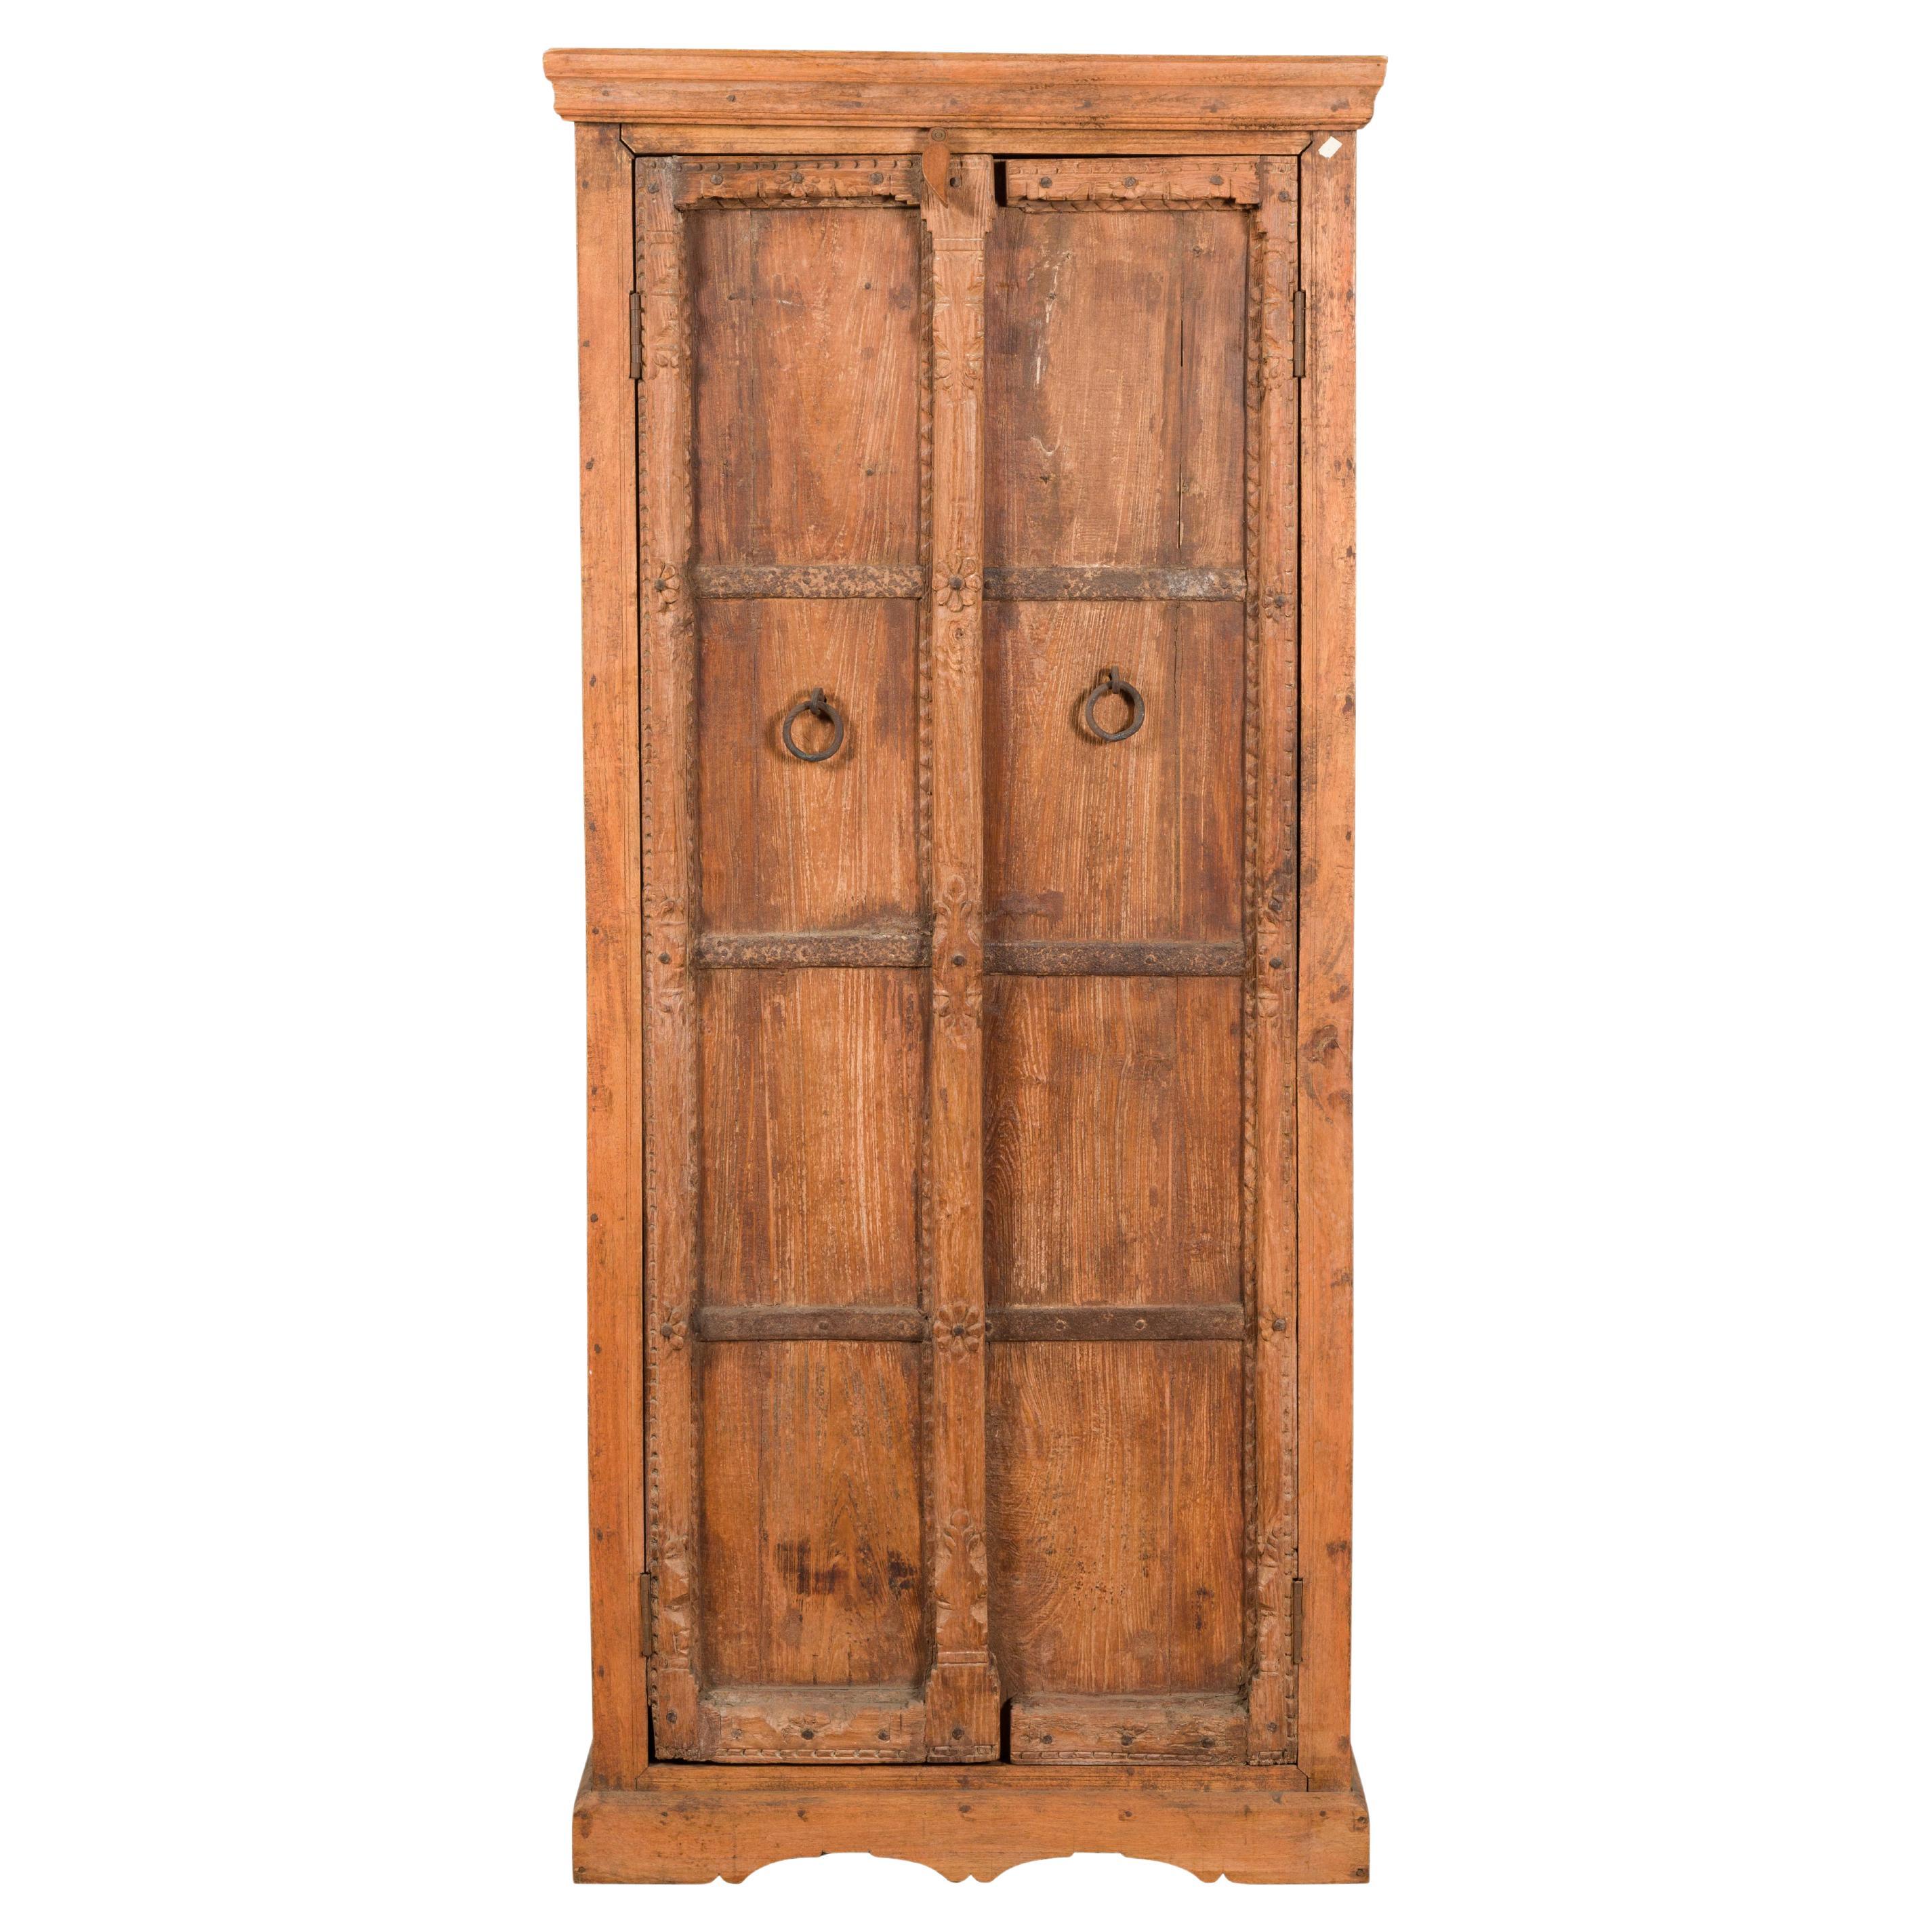 Mid 19th Century Indian Cabinet with Hand-Carved Floral Motifs and Iron Hardware